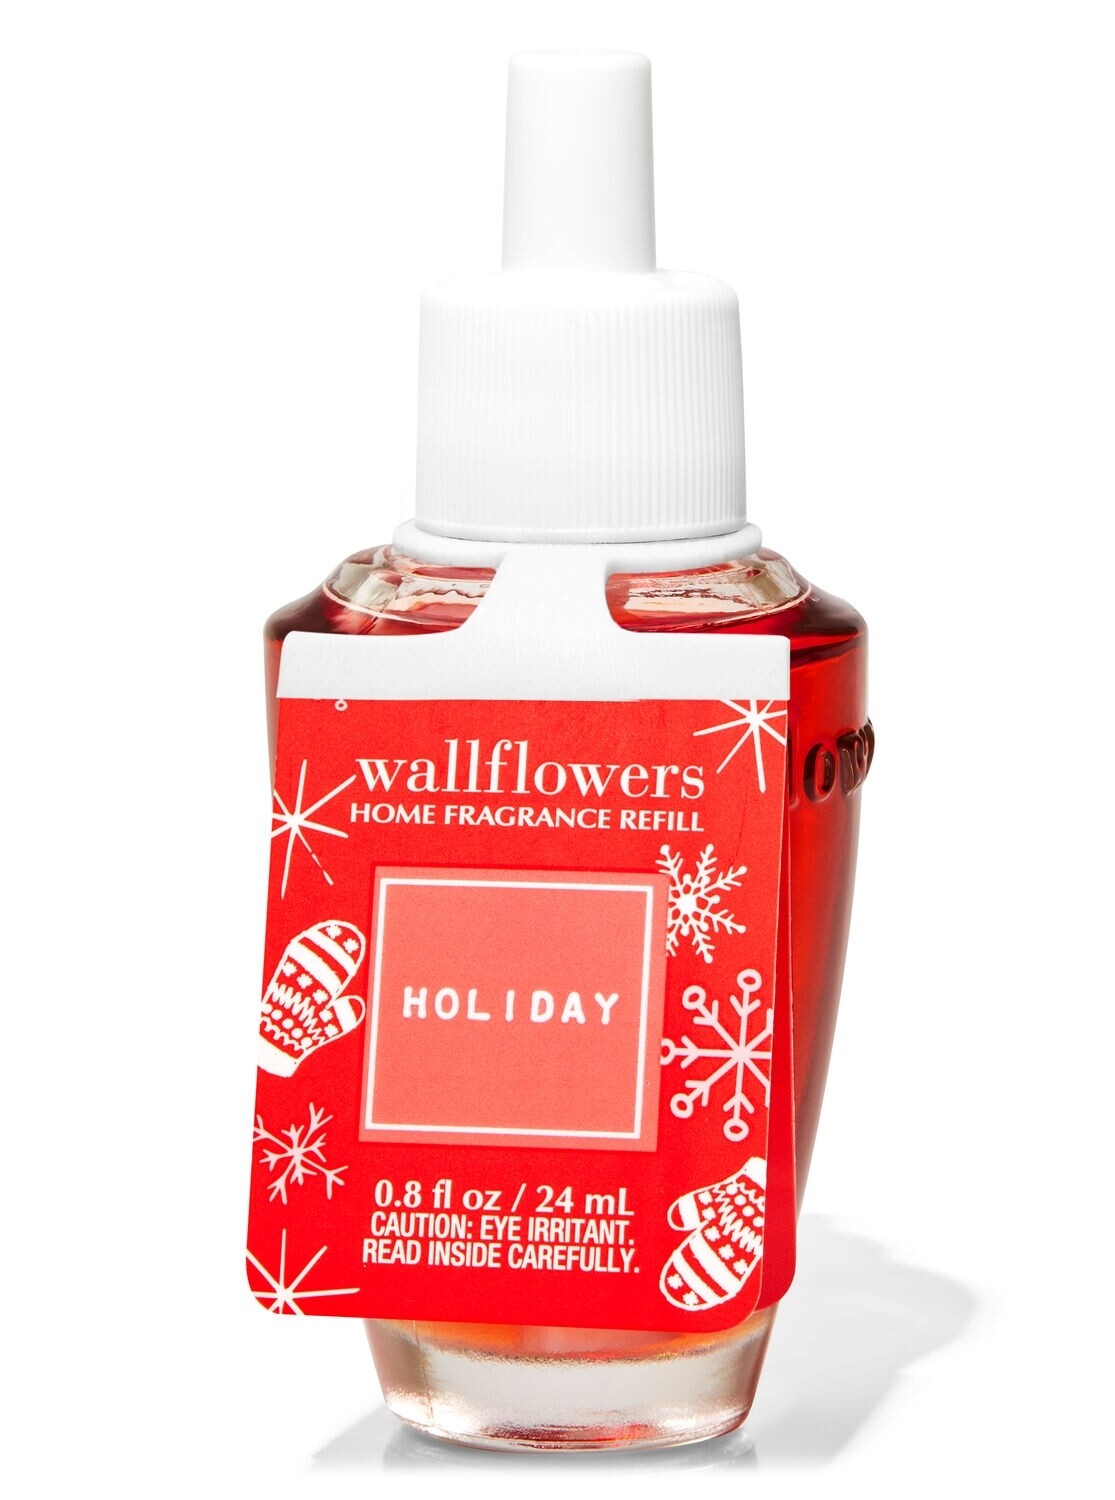 Bath and body works wallflower refill- Holiday